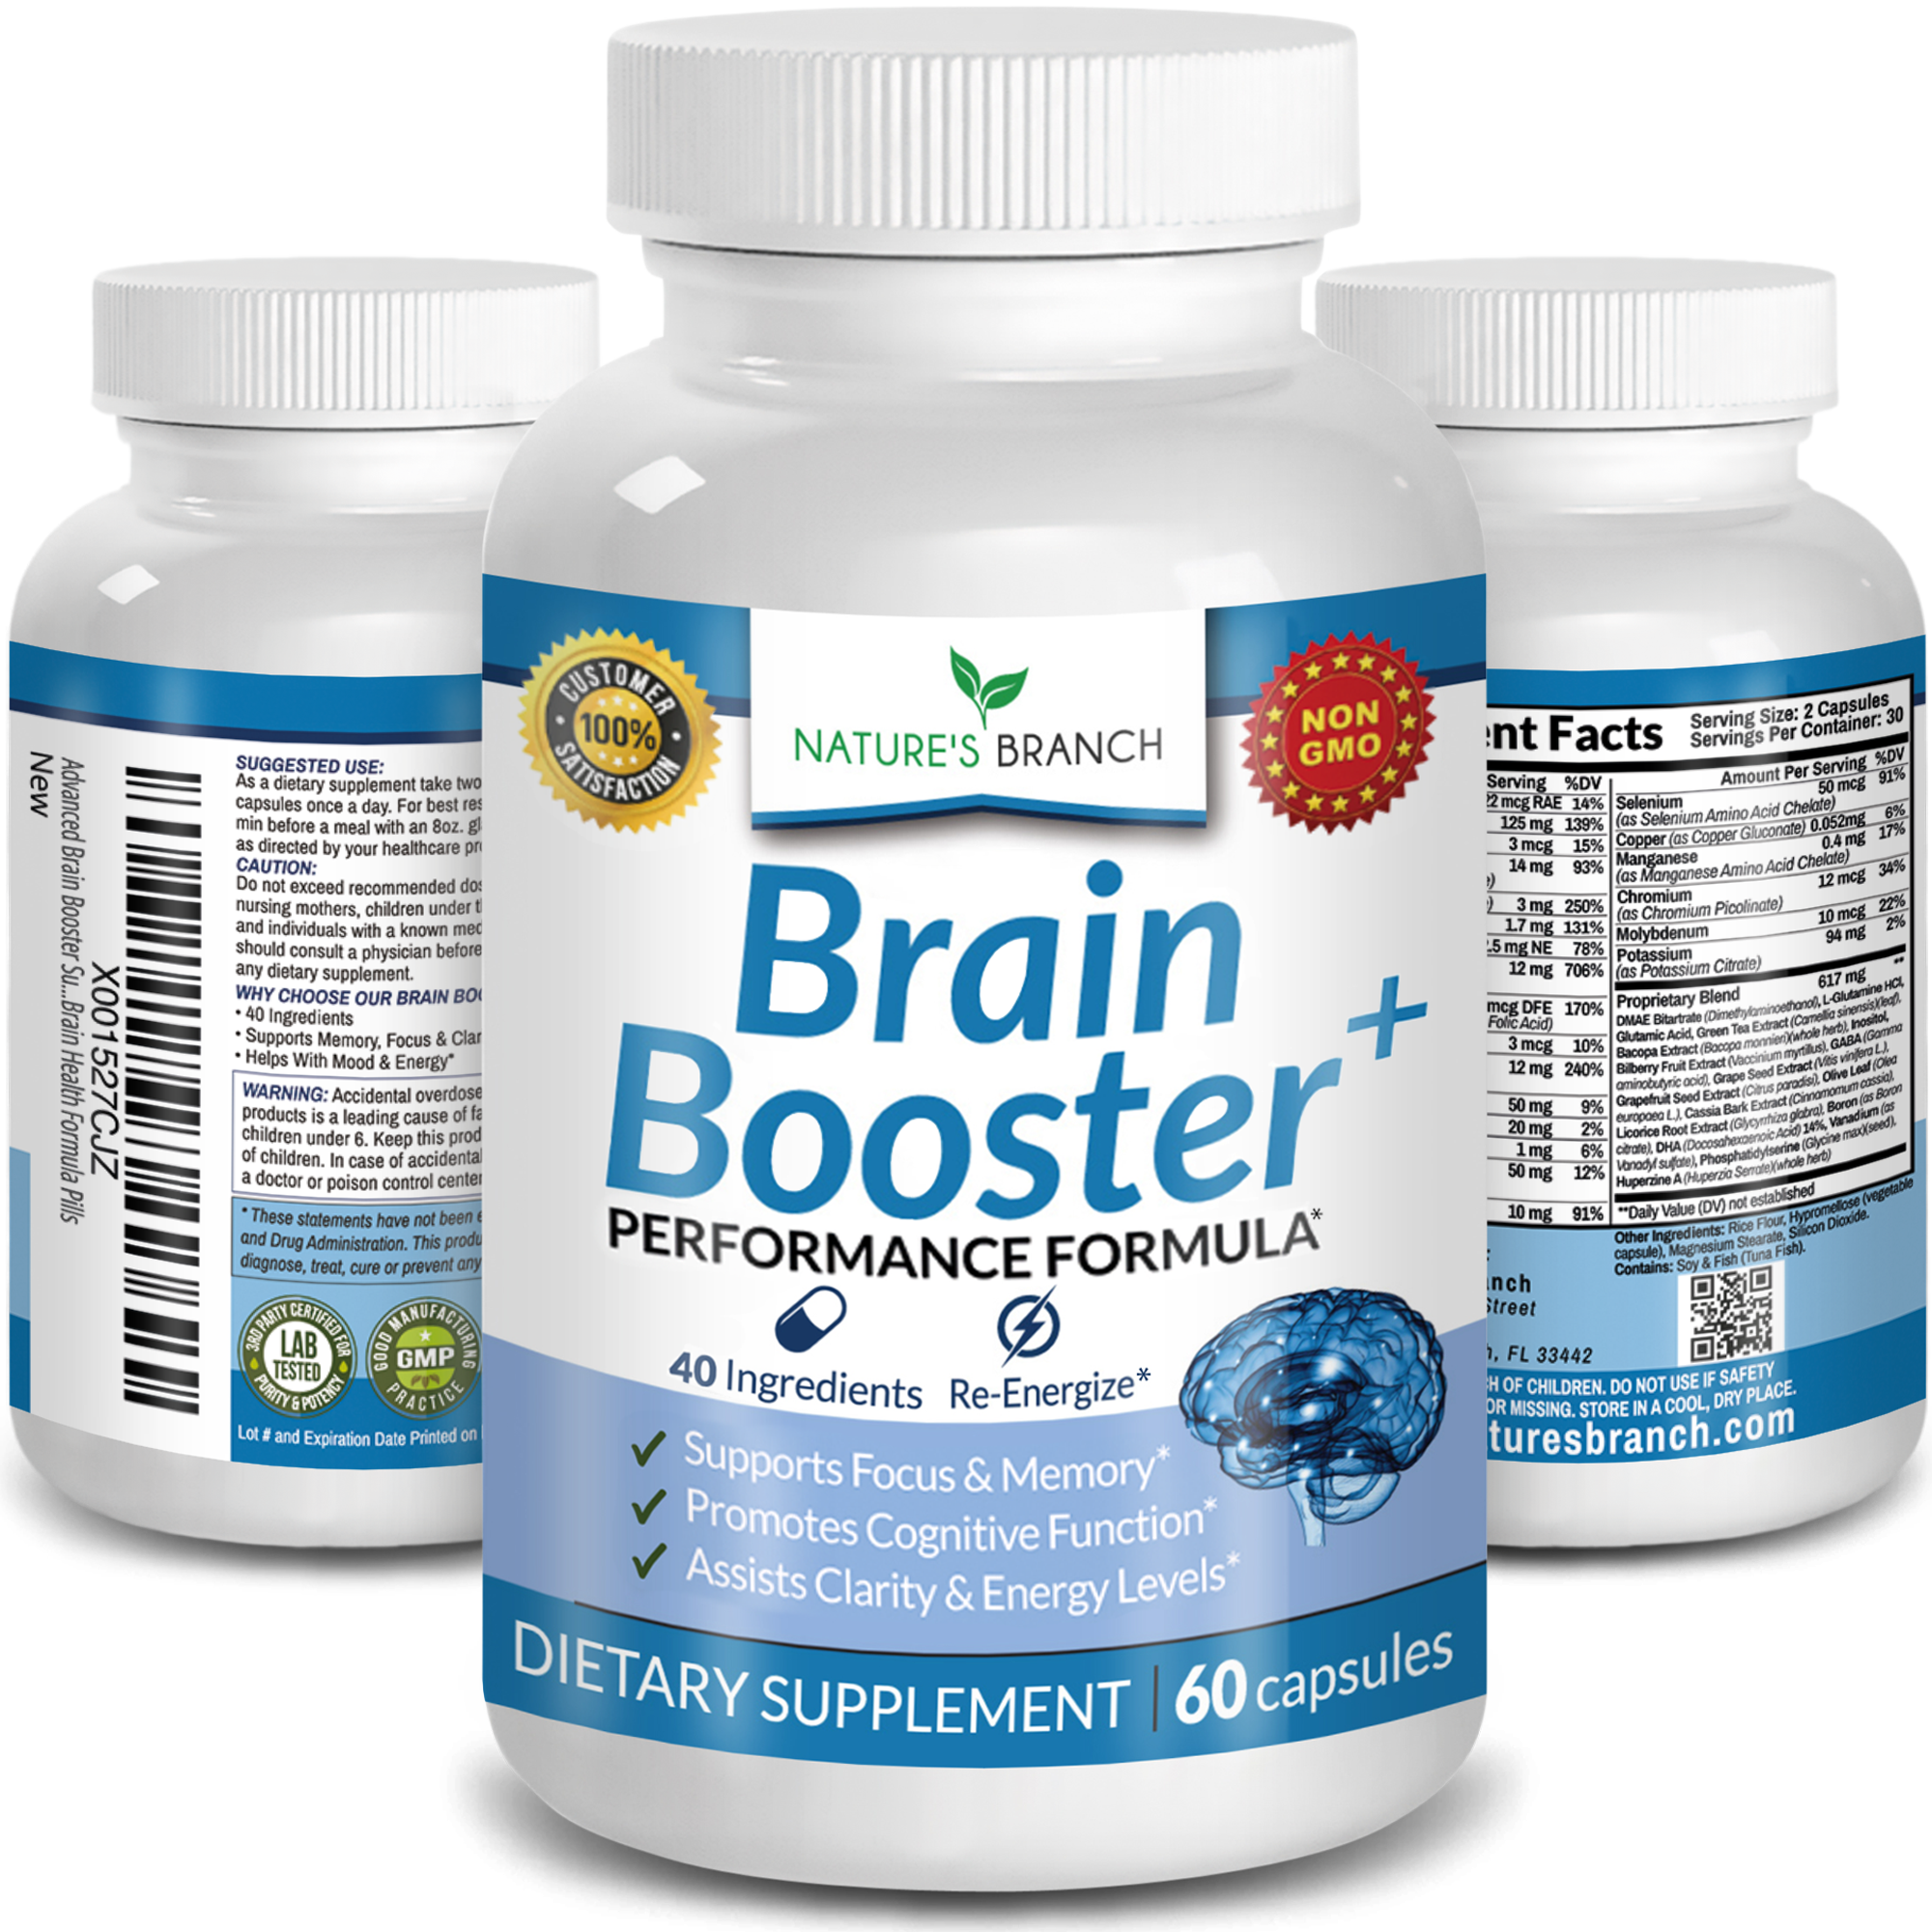 Nature's Branch Brain Booster supplement for memory focus and clarity